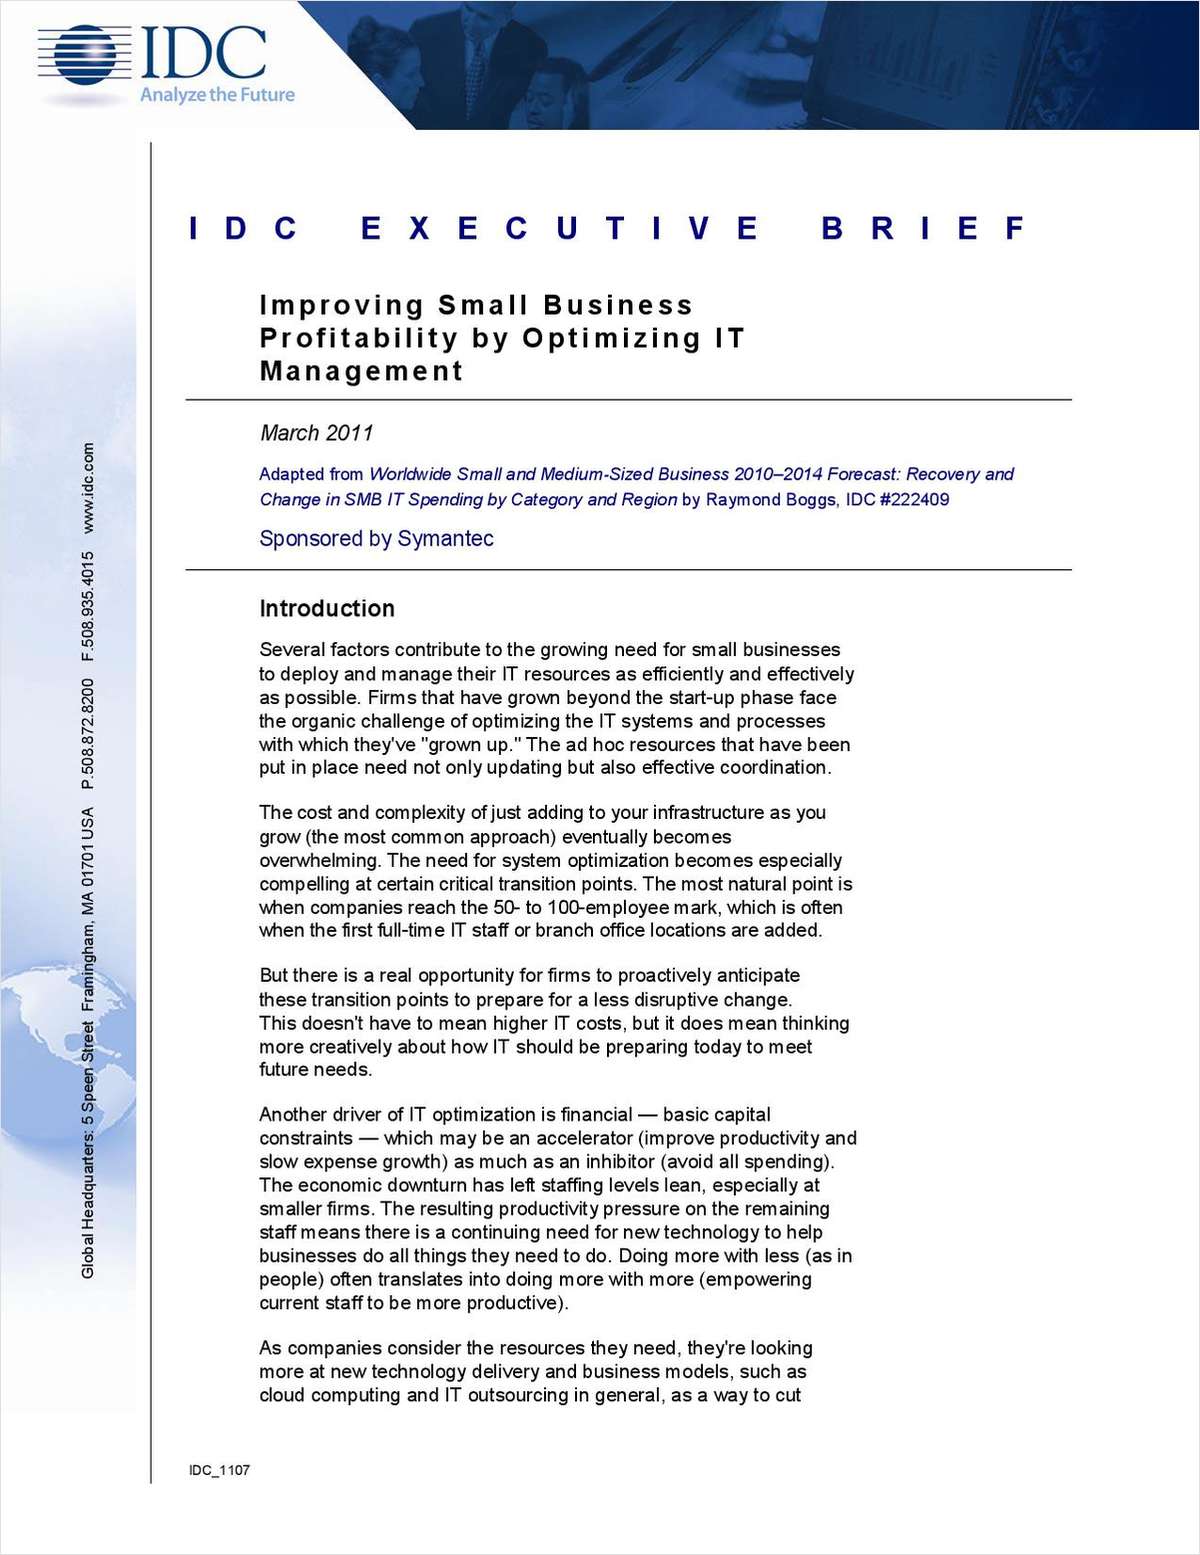 IDC Executive Brief: Improving Small Business Profitability by Optimizing IT Management